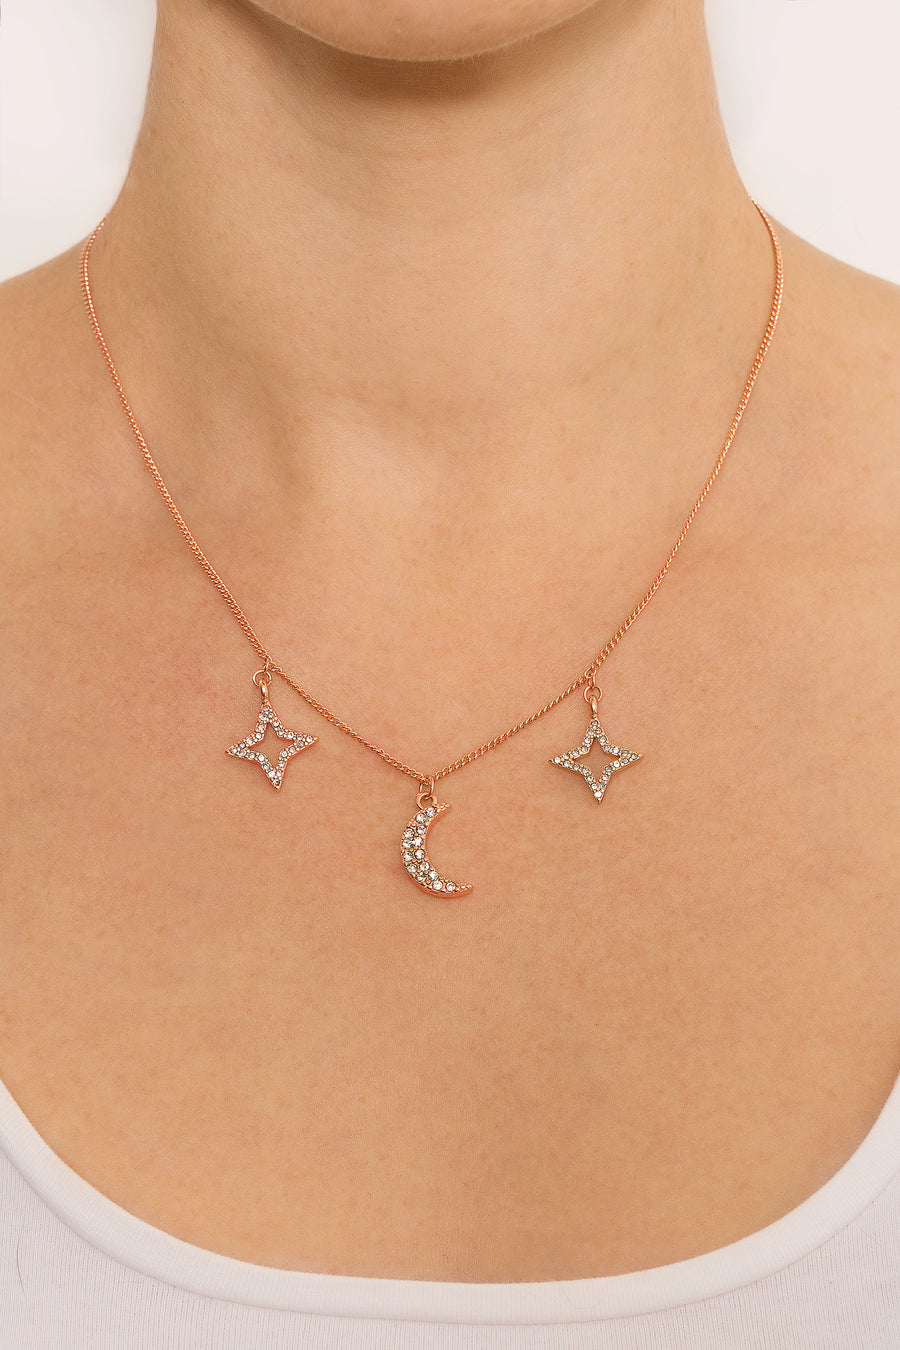 Celestial Rose Gold Star And Moon Crystal Effect Charm Necklace